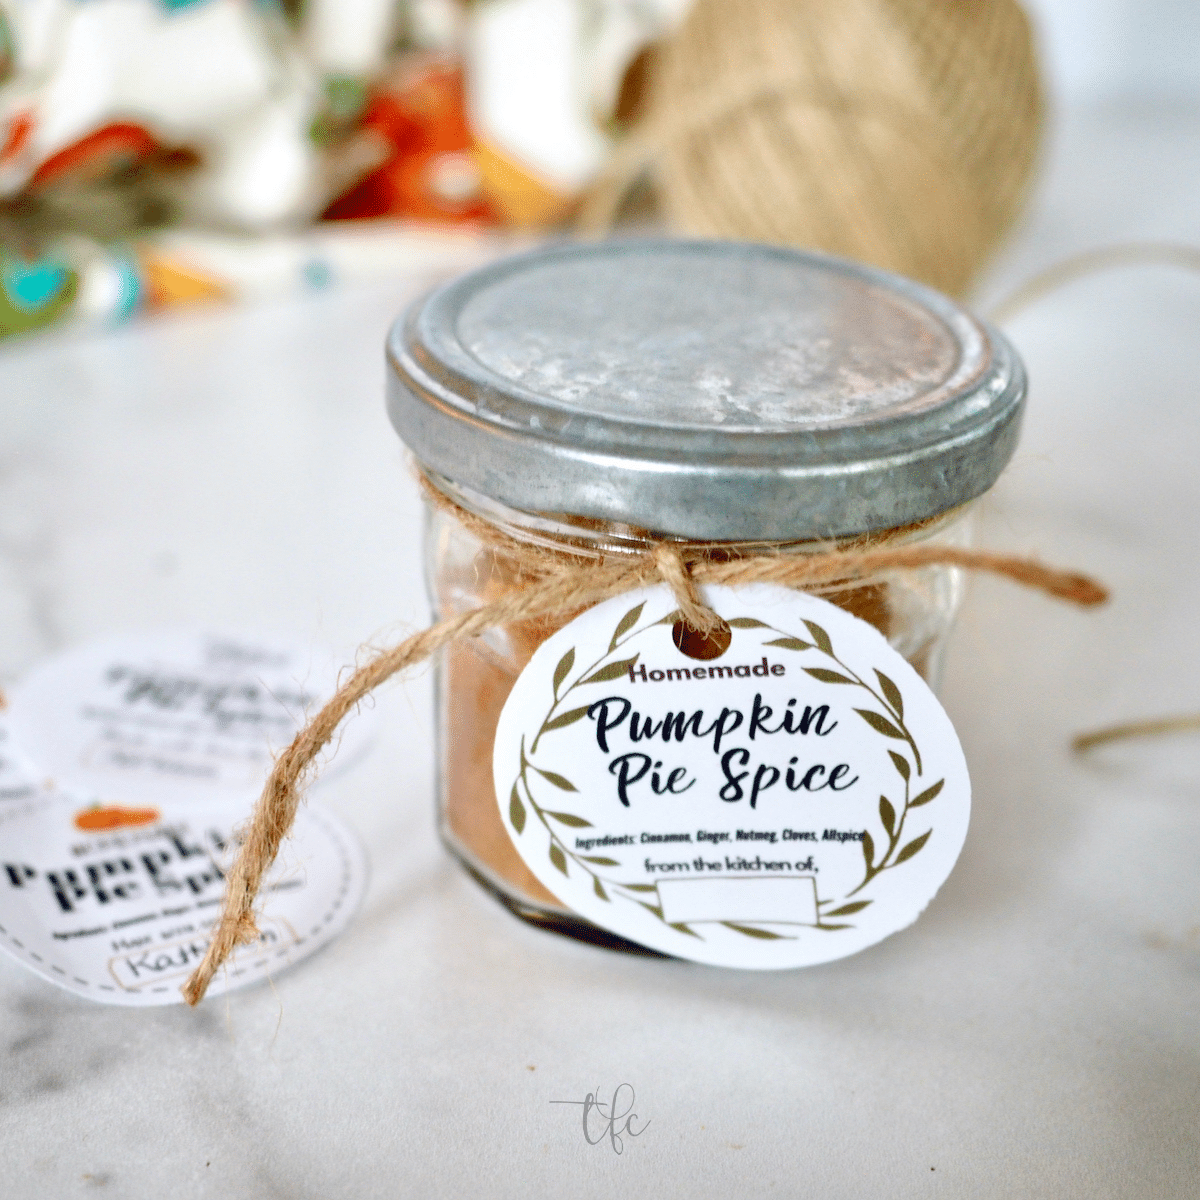 Square image of pumpkin pie spice substitute in a jar with a pretty gift tag.